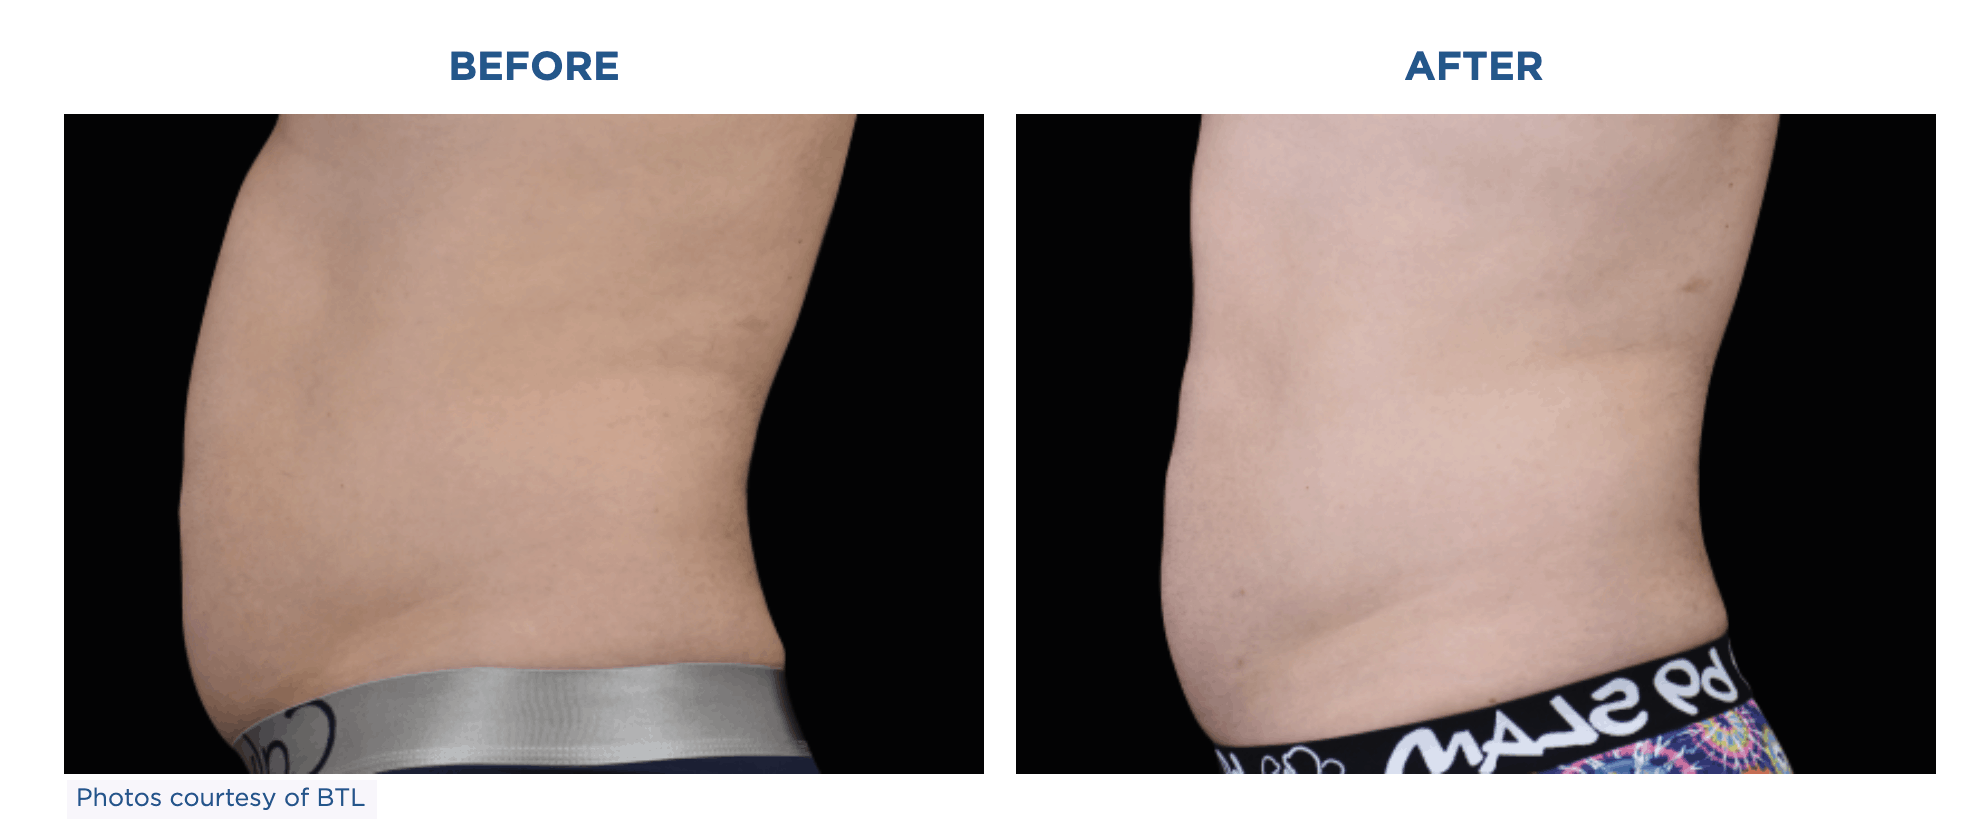 Transform your body with Emsculpt Neo - see amazing tummy tuck before and after results!